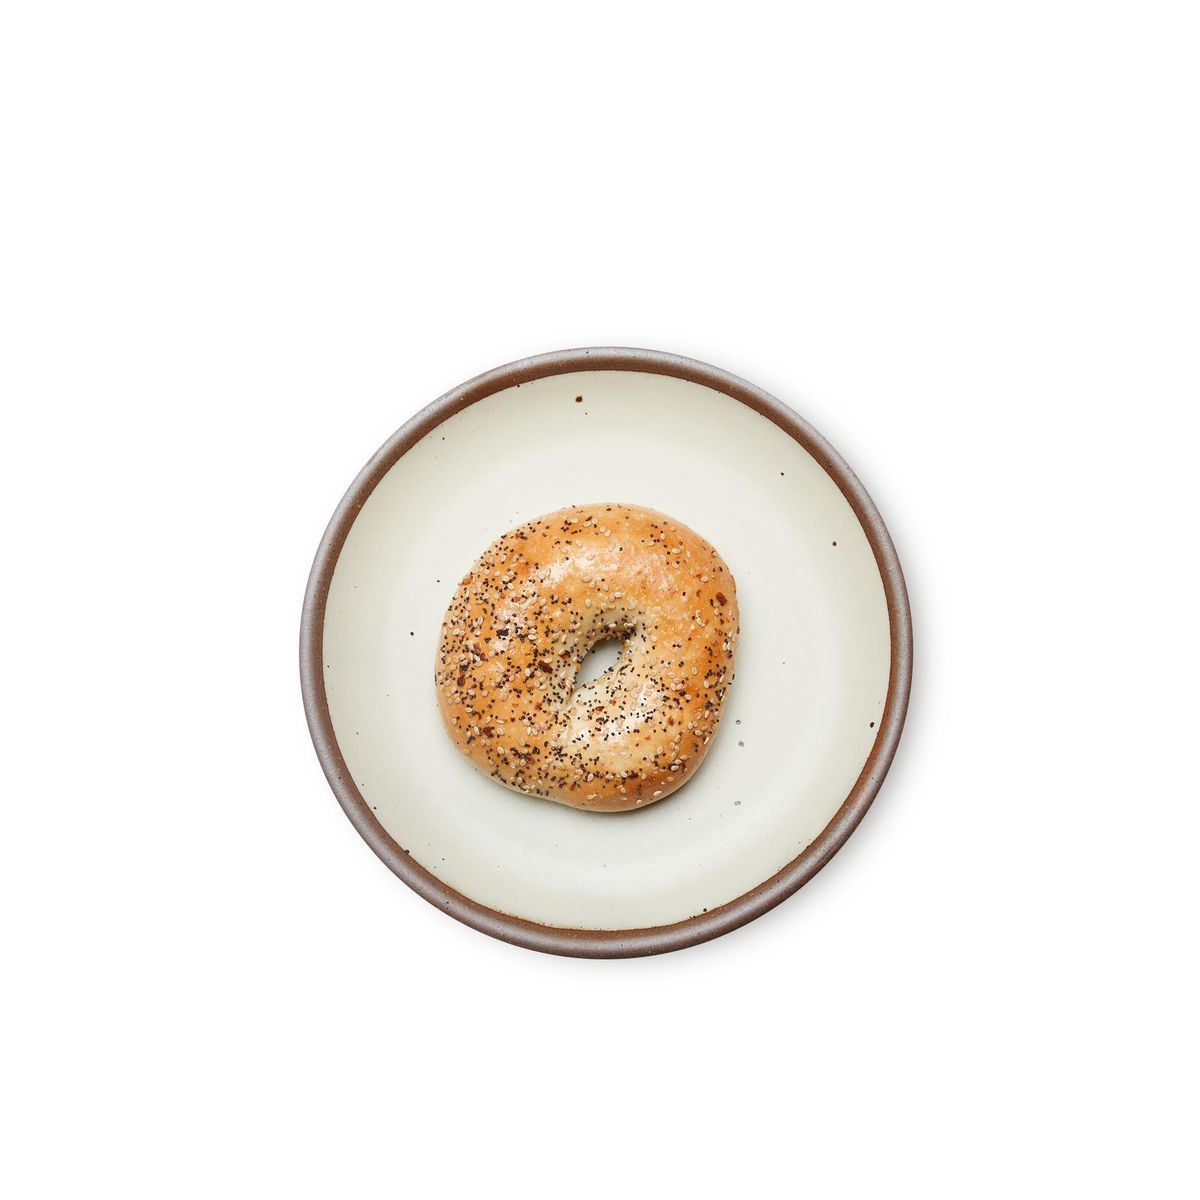 A bagel on a medium sized ceramic plate in a warm, tan-toned, off-whitecolor featuring iron speckles and an unglazed rim.